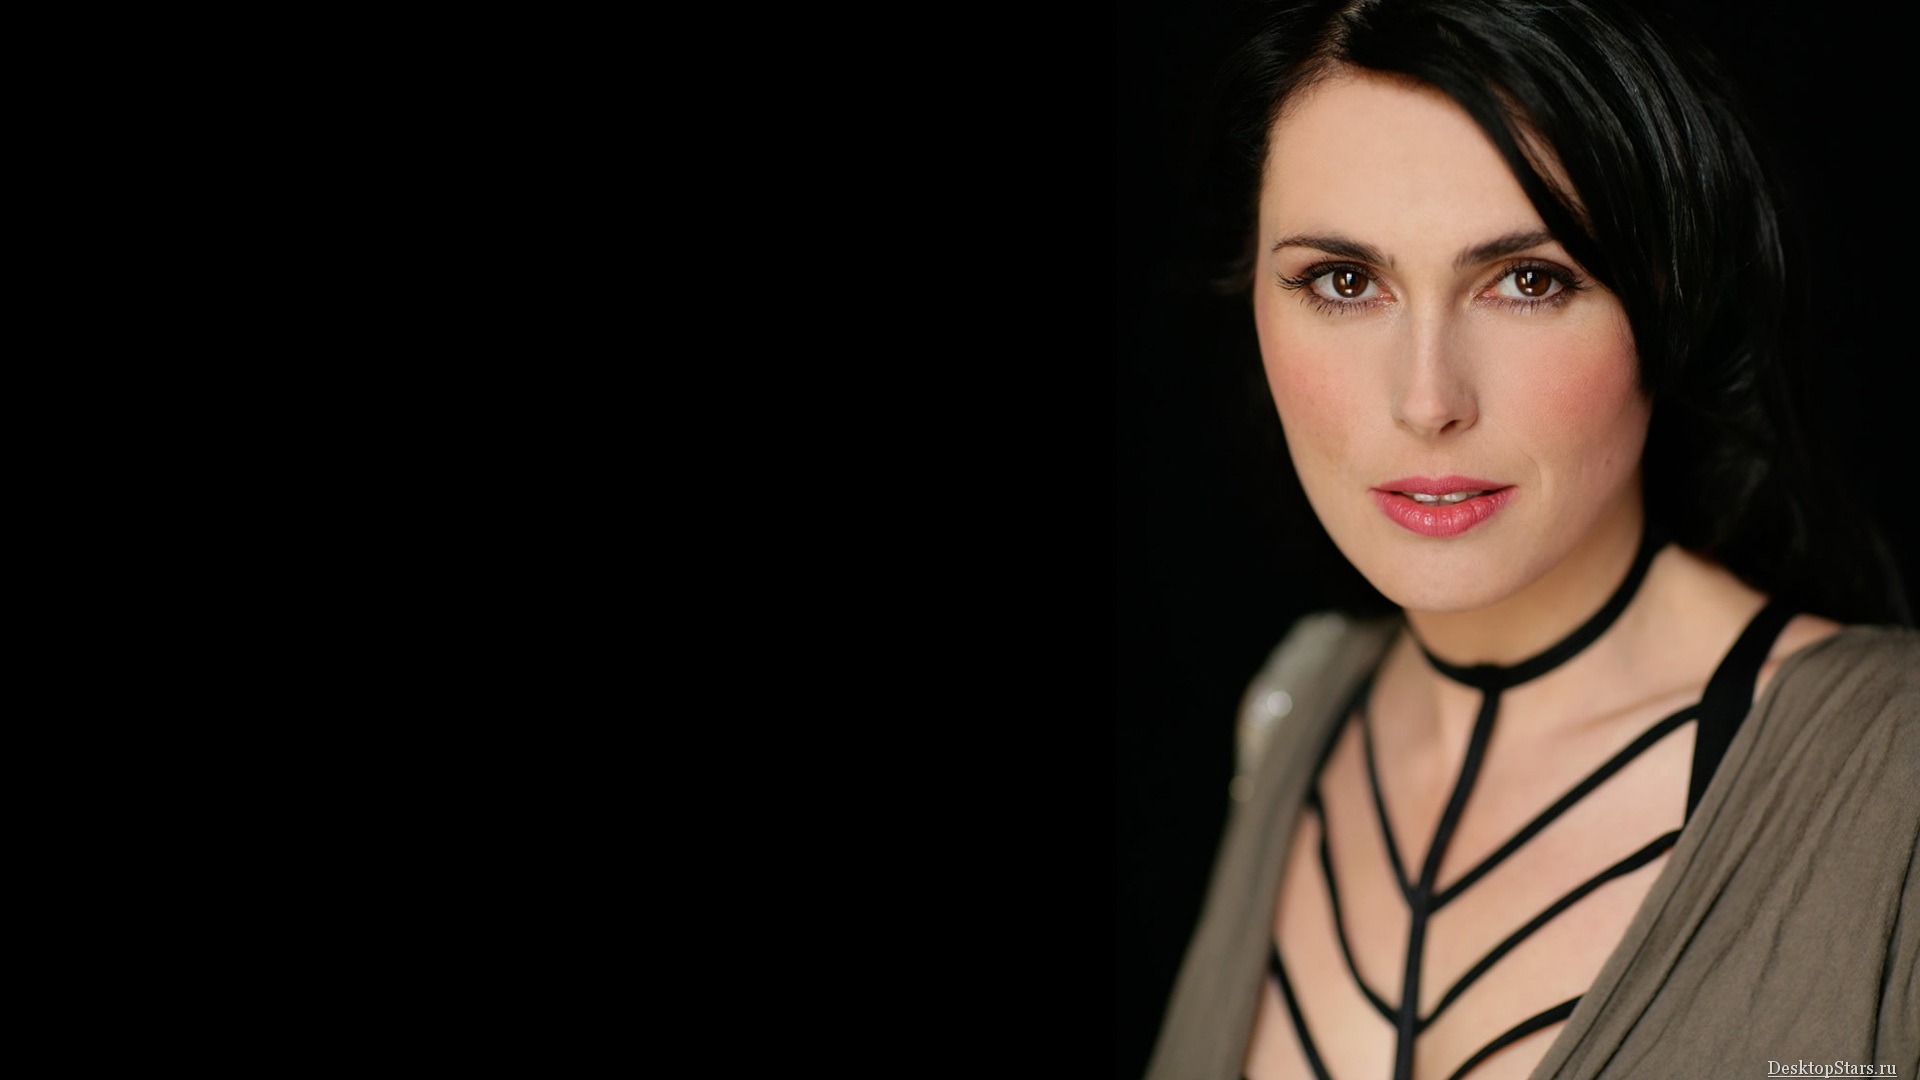 Sharon den Adel #005 - 1920x1080 Wallpapers Pictures Photos Images